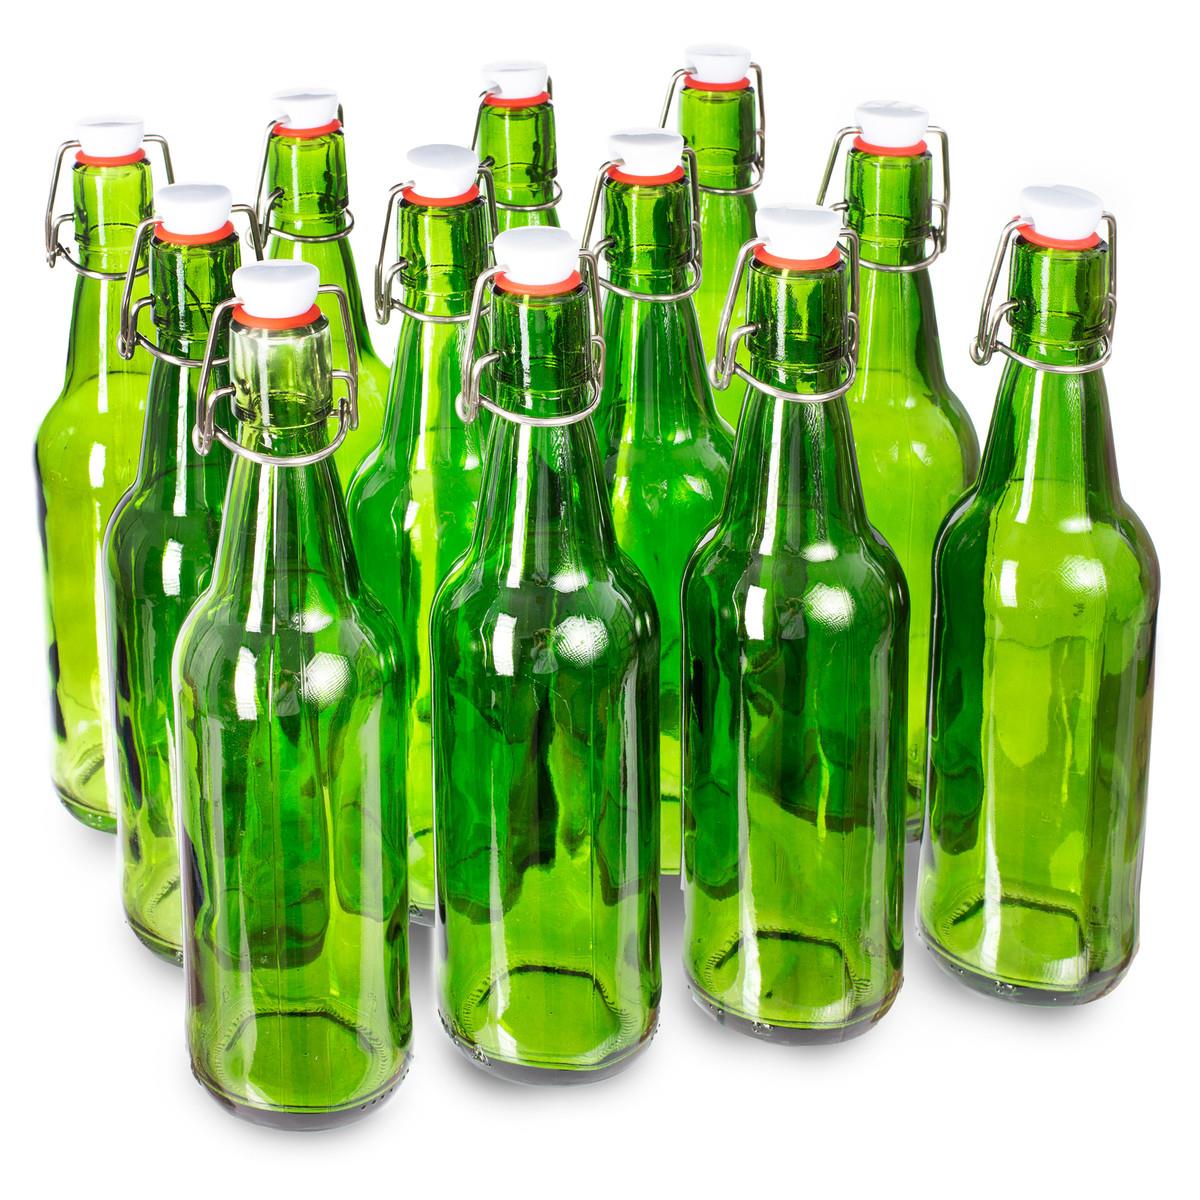 Picture of Brybelly KBOT-114 16 oz Grolsch Bottle, Green - Pack of 12